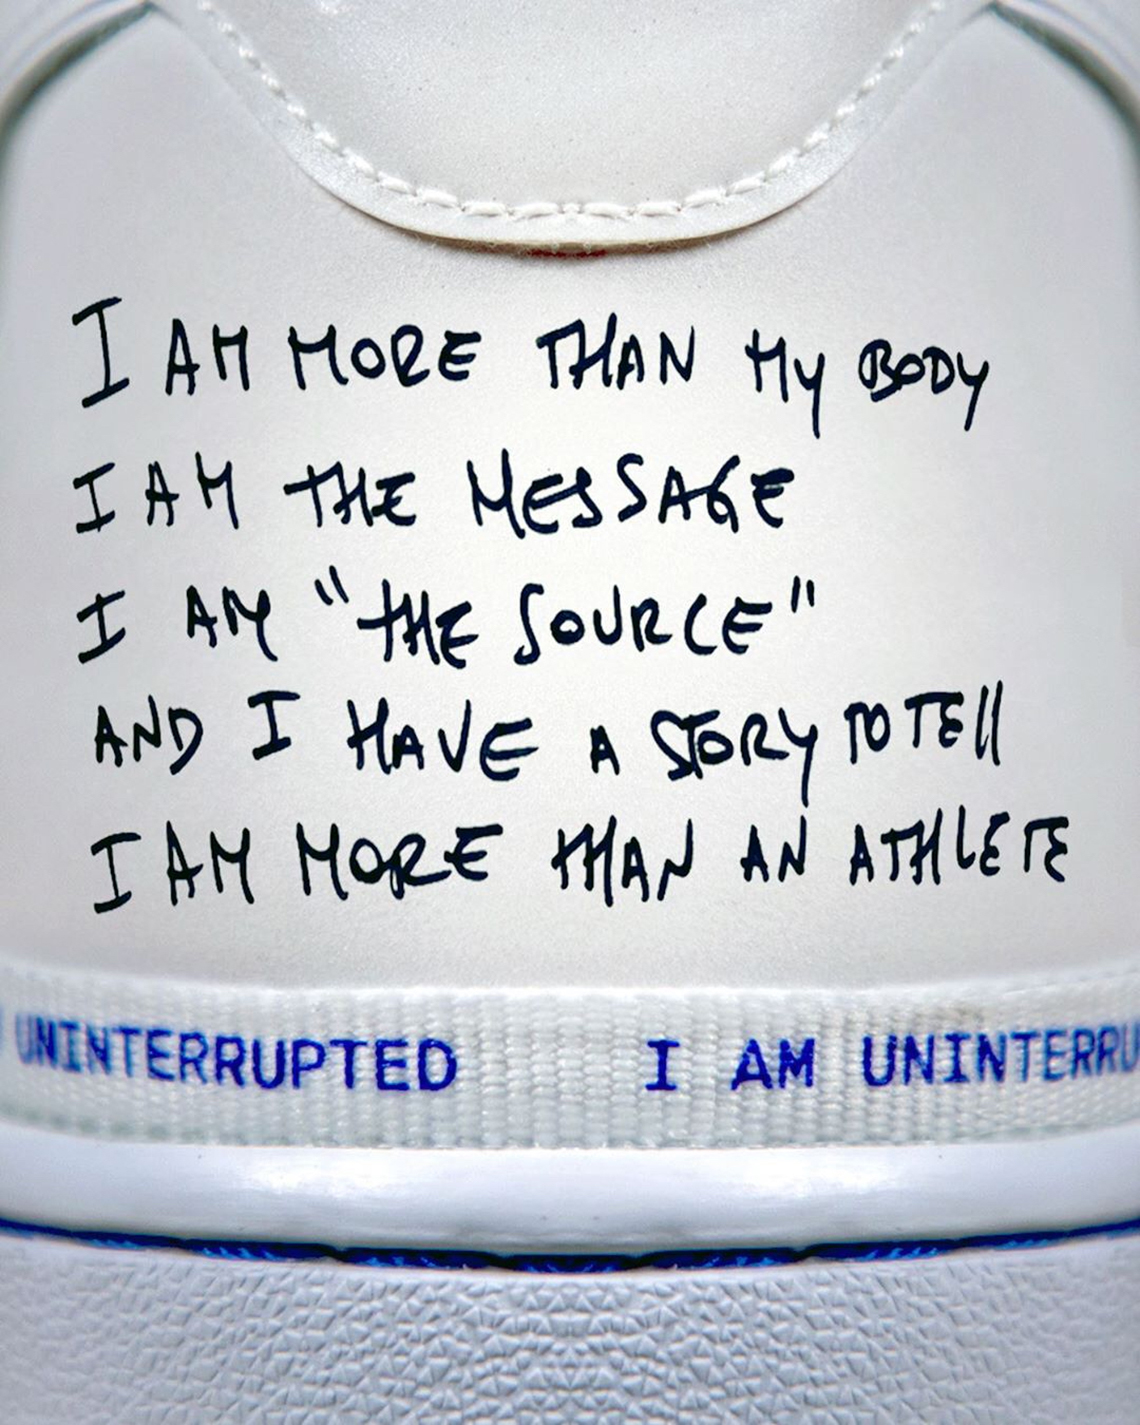 uninterrupted more than an athlete hoodie